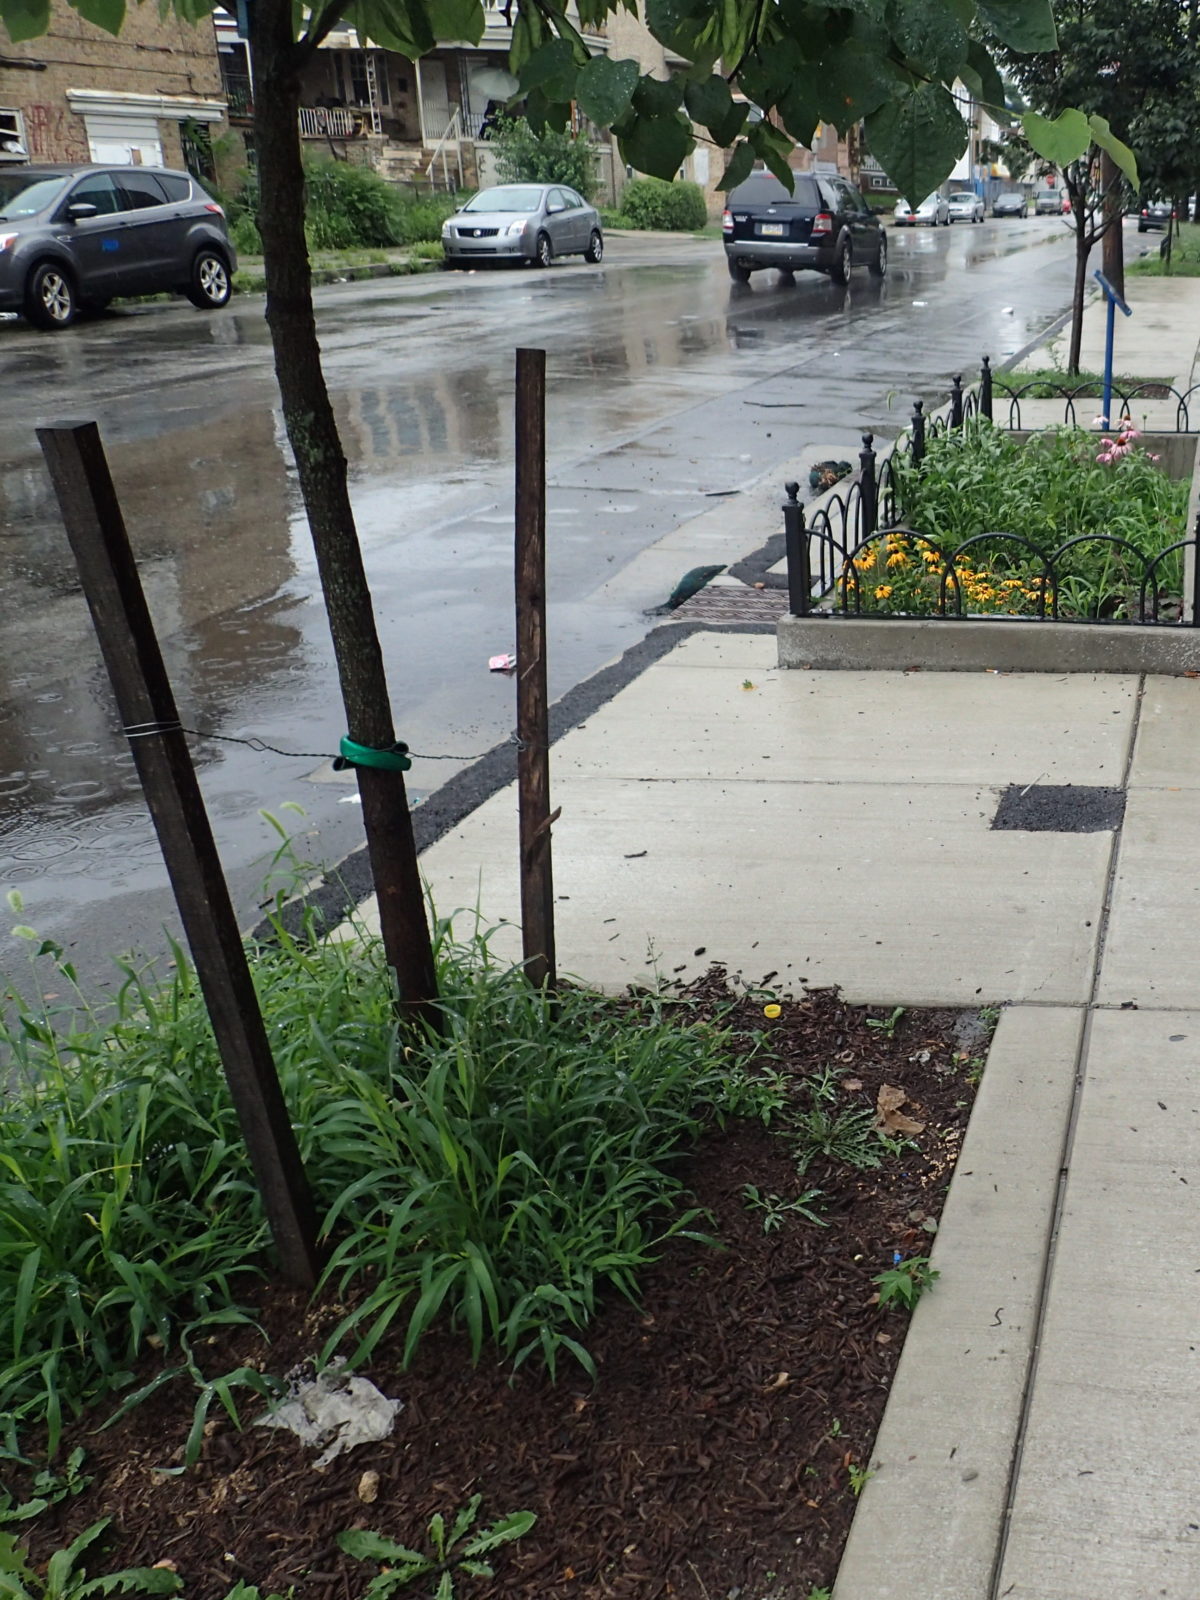 As it rains on this block, water that lands on the sidewalk flows into a series of stormwater tree pits, while a curb cut with a decorative metal cover allows water from the street to flow into a stormwater planter set on the edge of the sidewalk between two of the trees.